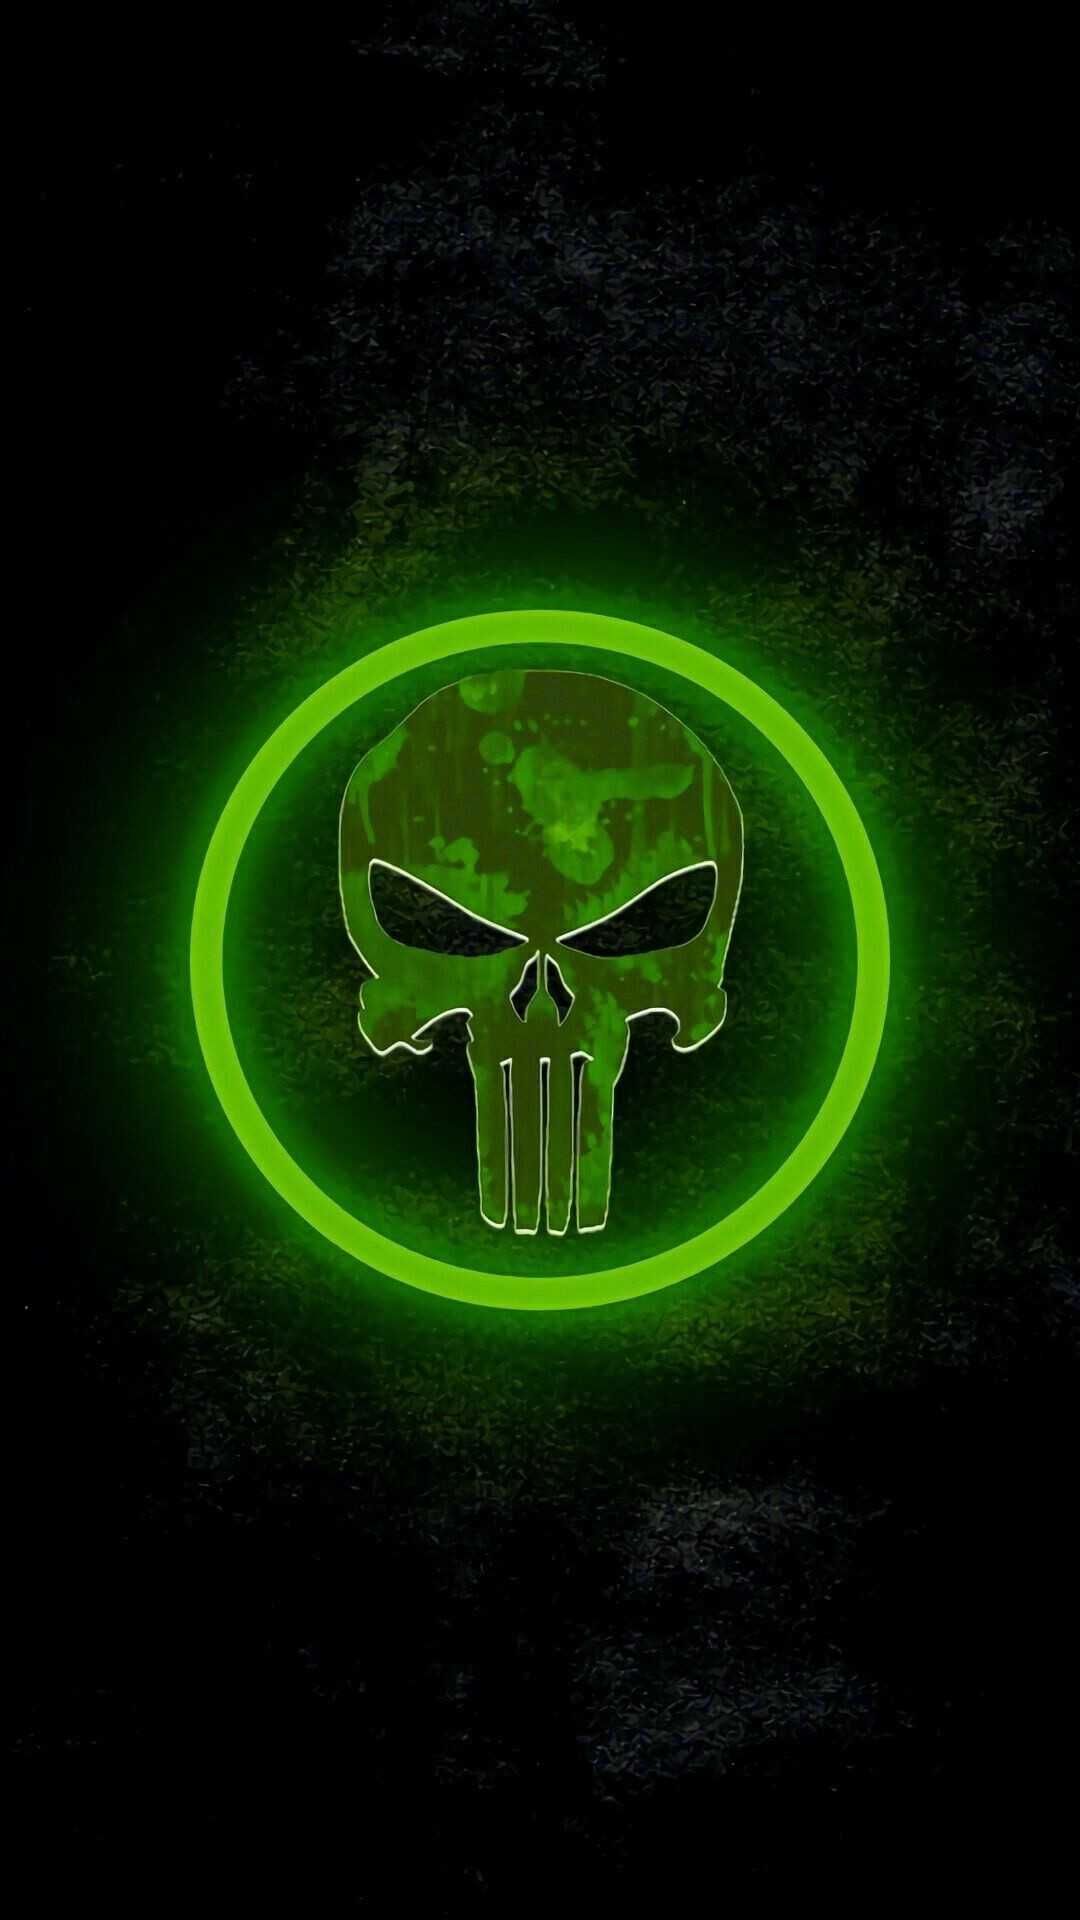 IPhone Wallpaper The Punisher with high-resolution 1080x1920 pixel. You can use this wallpaper for your iPhone 5, 6, 7, 8, X, XS, XR backgrounds, Mobile Screensaver, or iPad Lock Screen - Skull